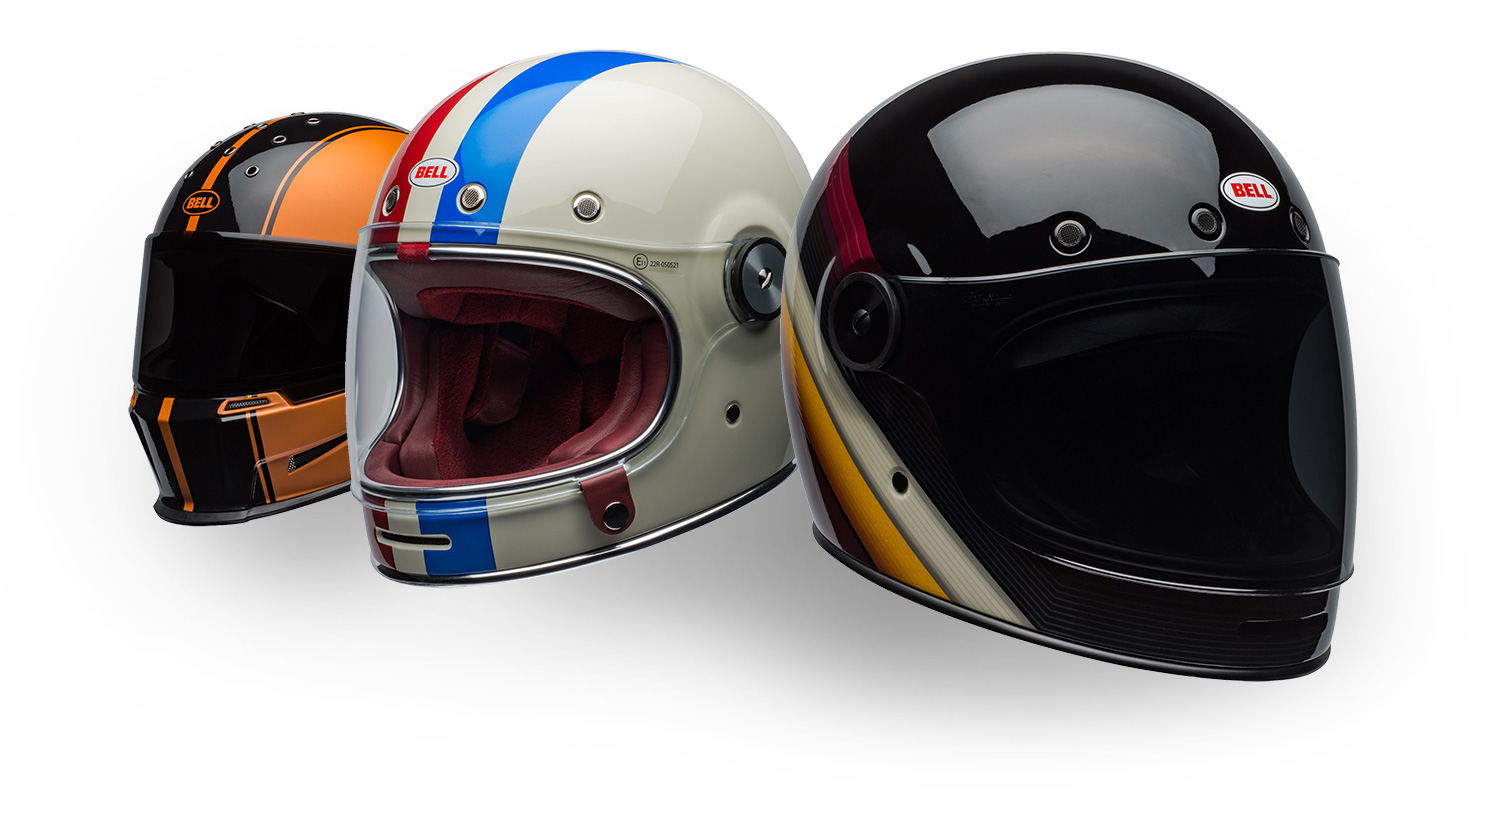 trio of striped Bell helmets facing away at angle with front one facing opposite of back two